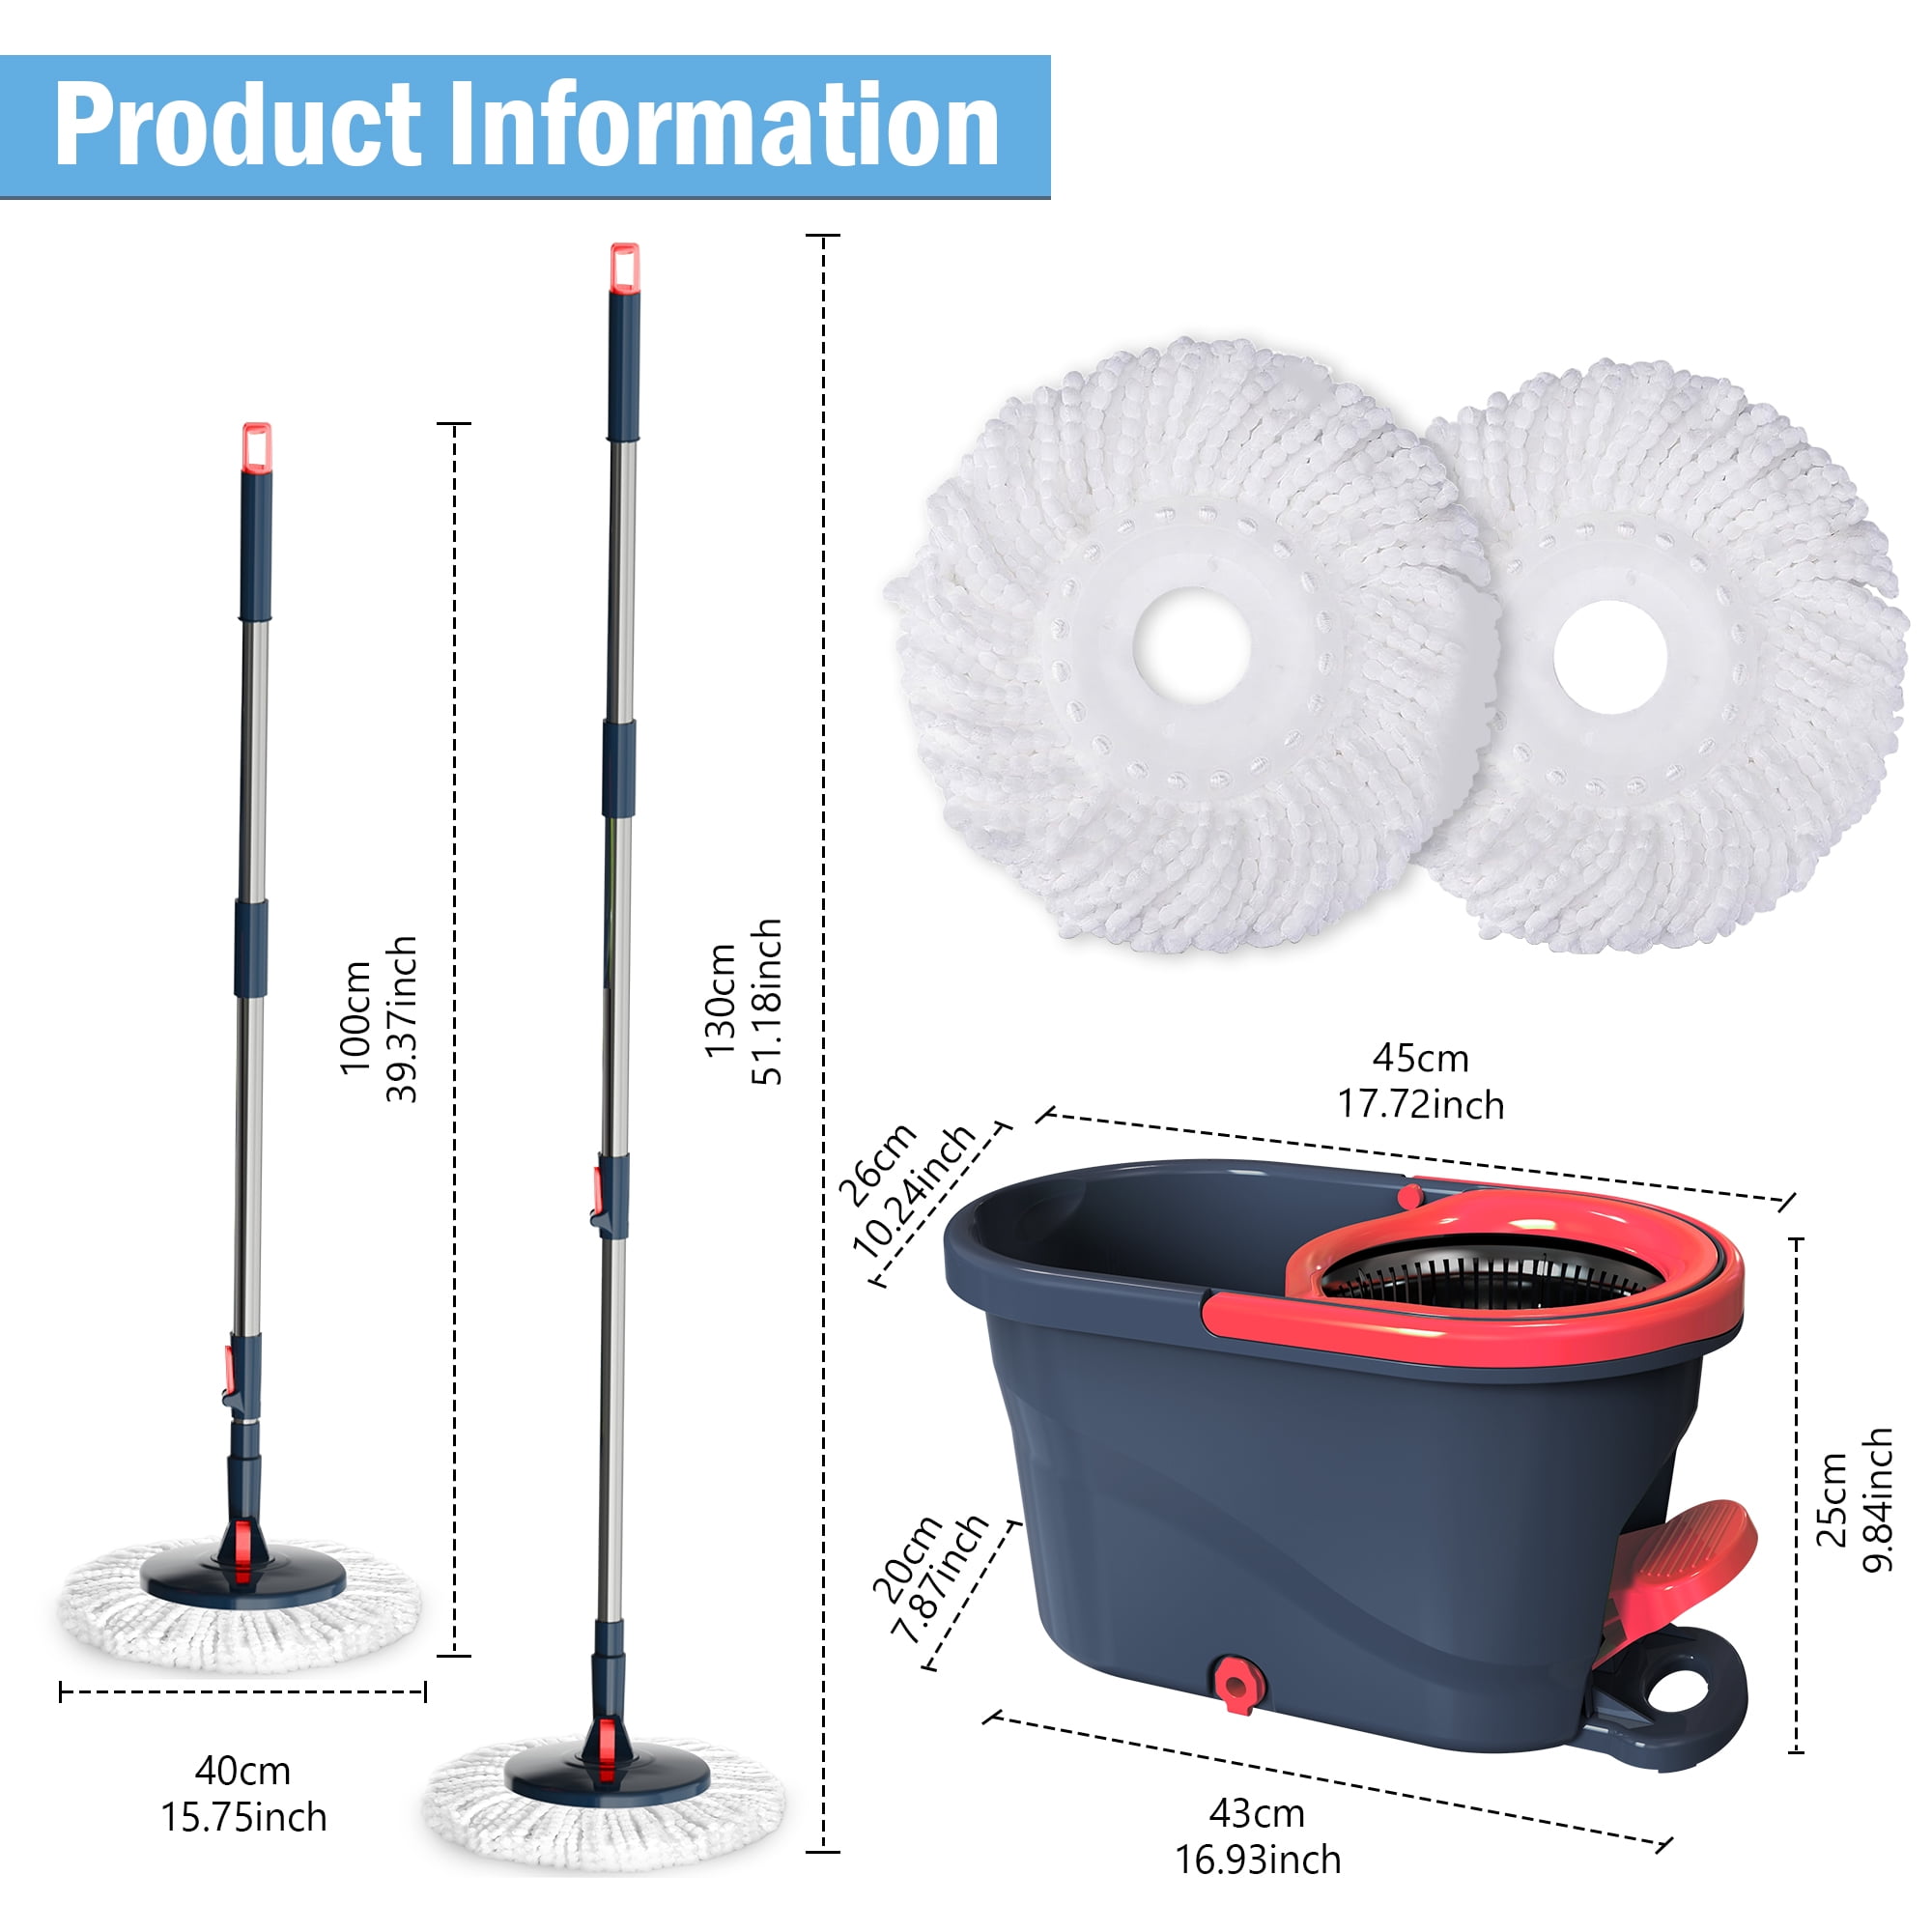 Ausyst Home & Kitchen Spin Mop and Bucket with Wringer Set, Support Self Separation Sewage and Clean Water, Telescopic Stainless-Steel Mop Cleaning